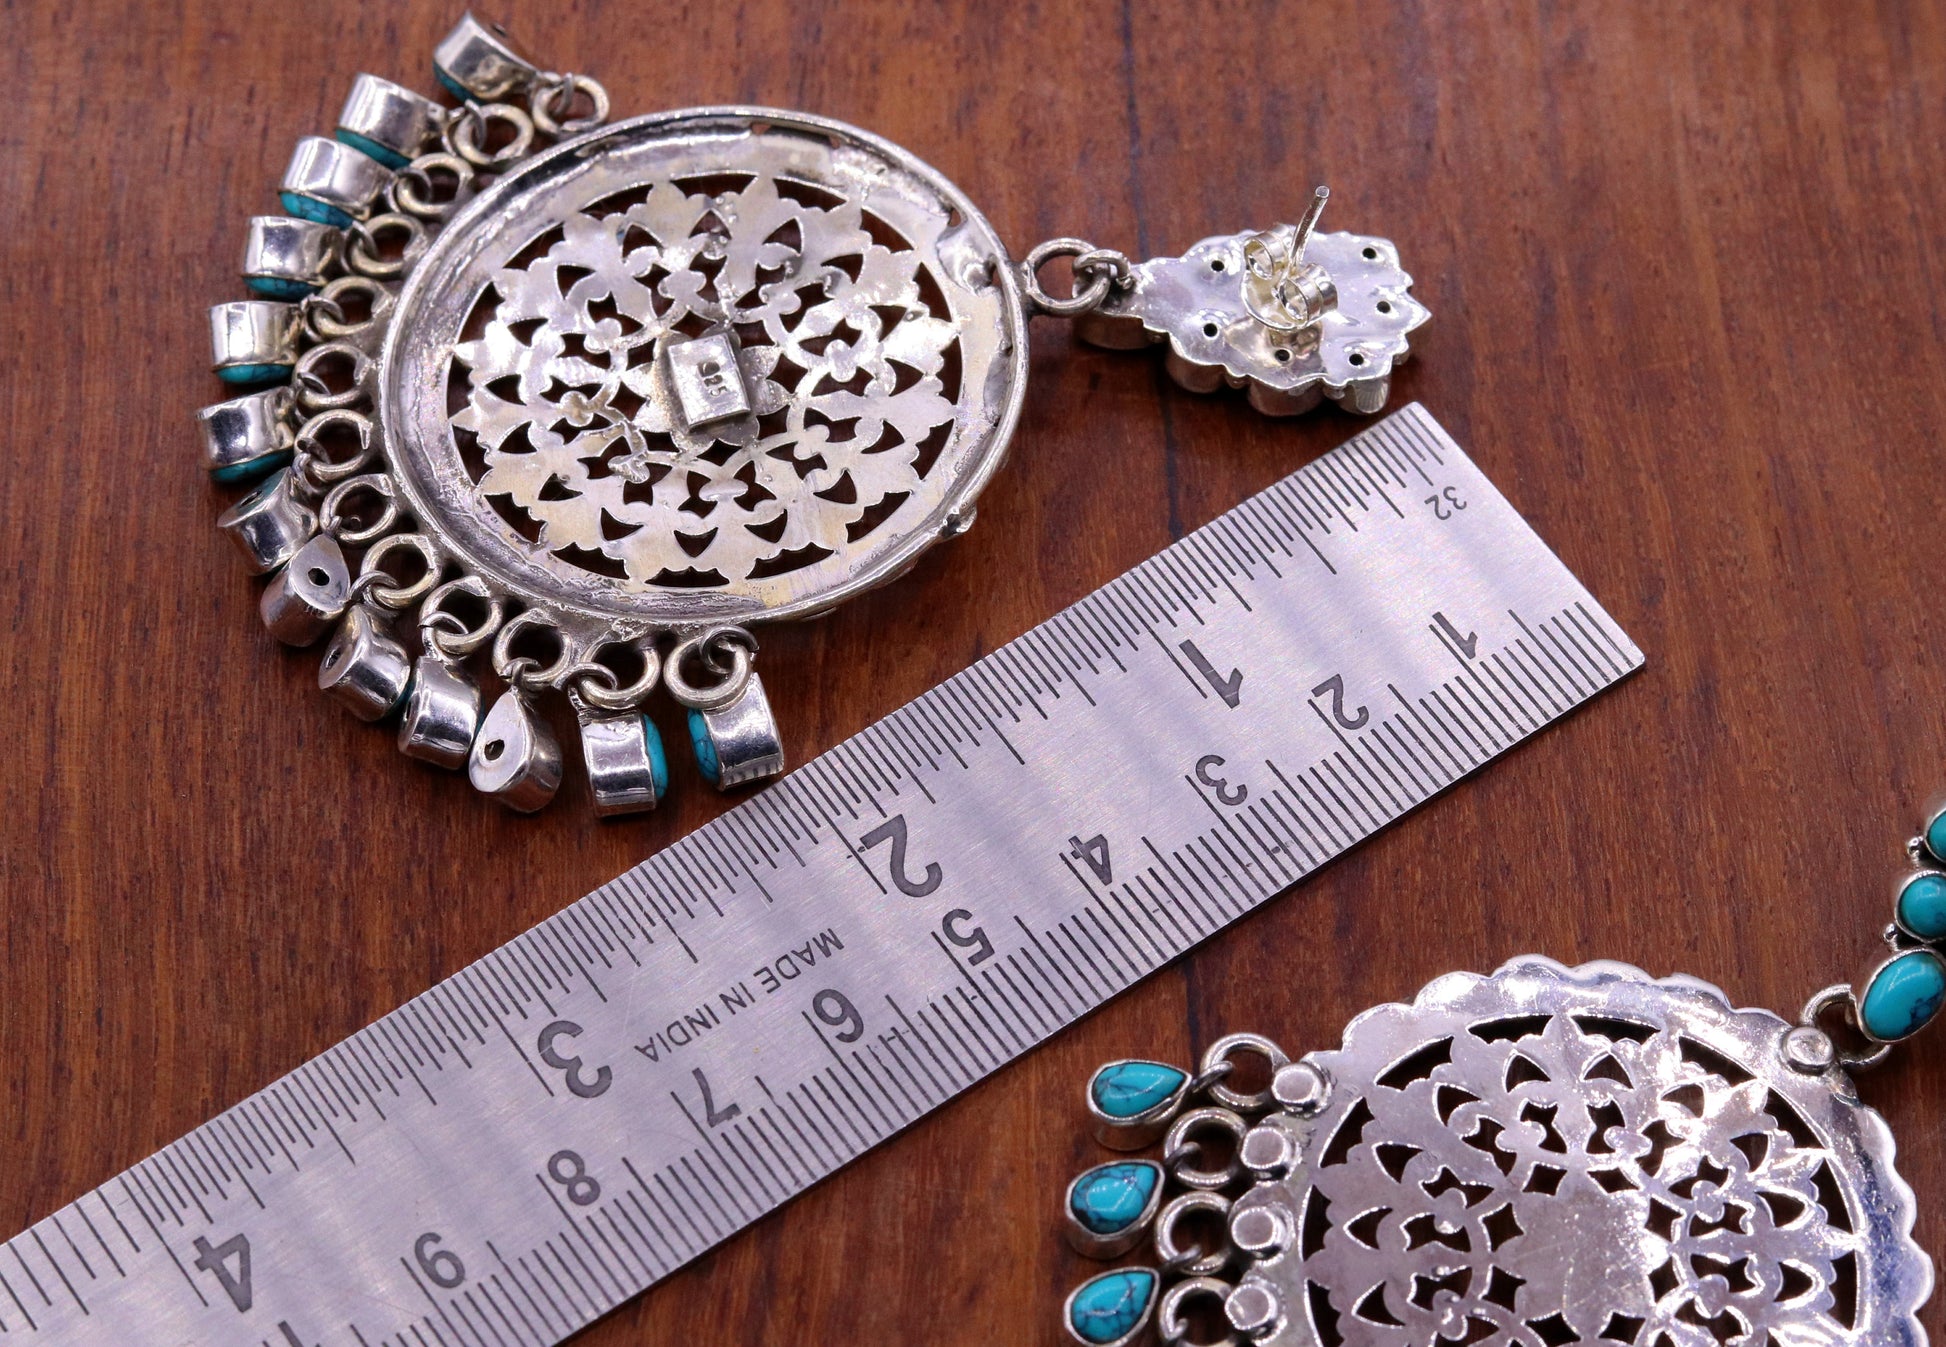 925 sterling silver handmade vintage design customized large stud earrings with turquoise stone hanging drops tribal jewelry from india s720 - TRIBAL ORNAMENTS